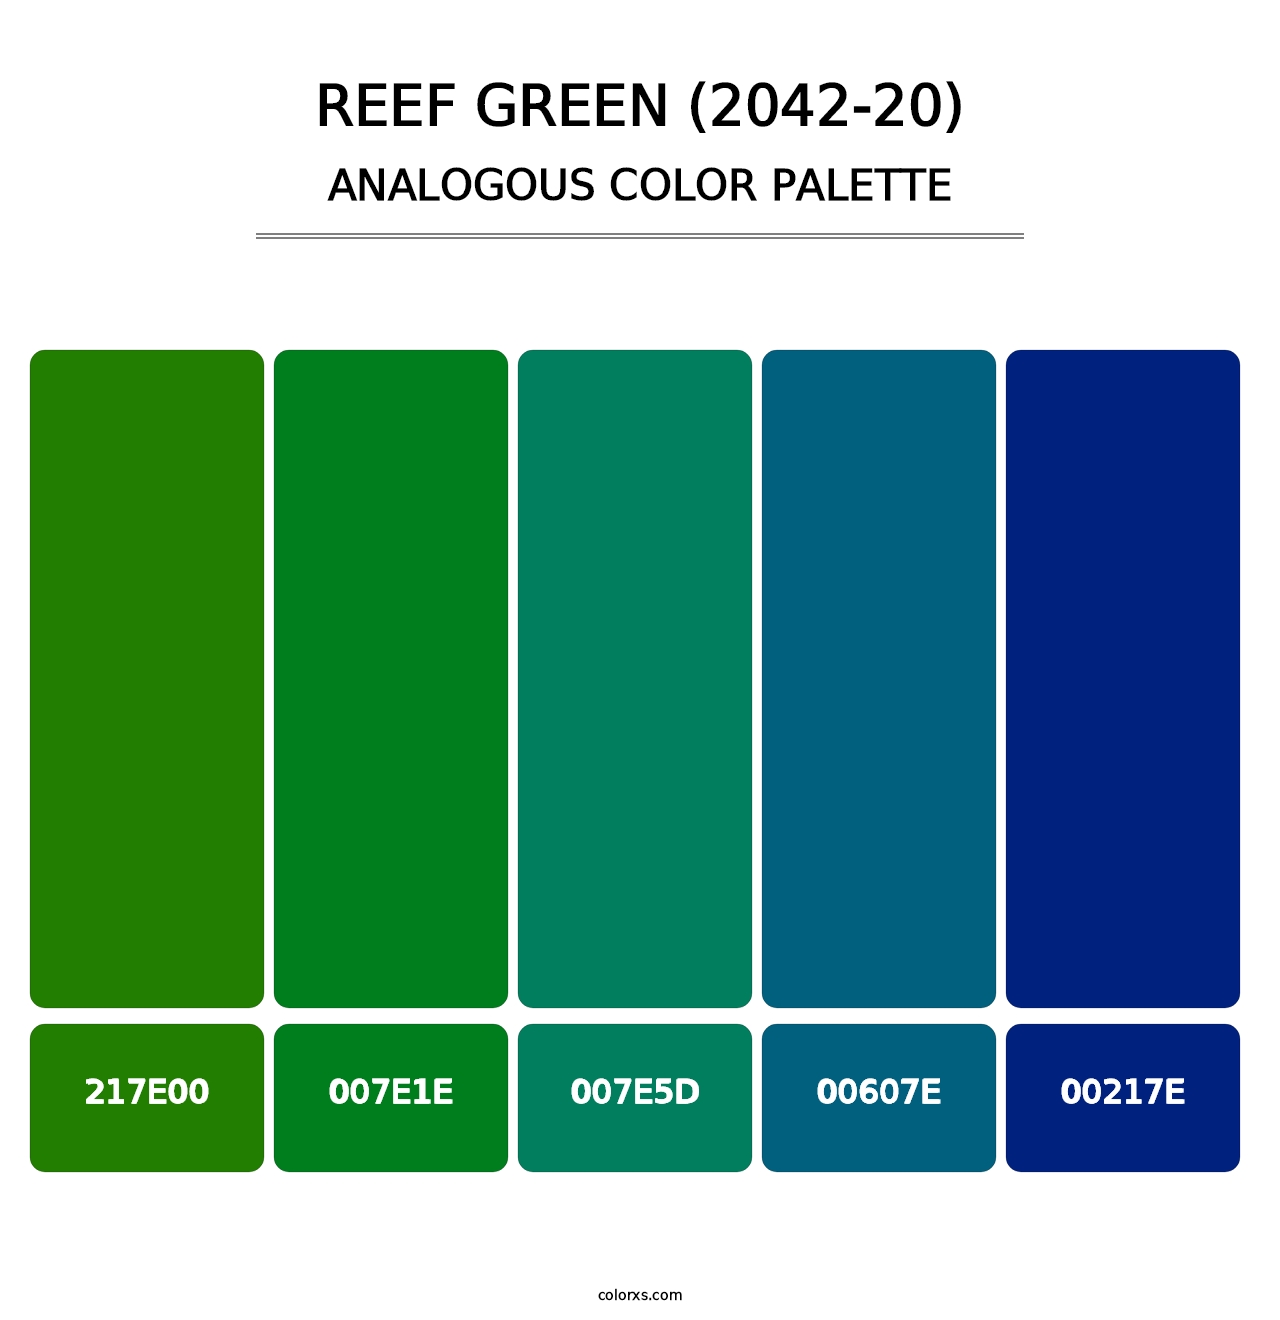 Reef Green (2042-20) - Analogous Color Palette